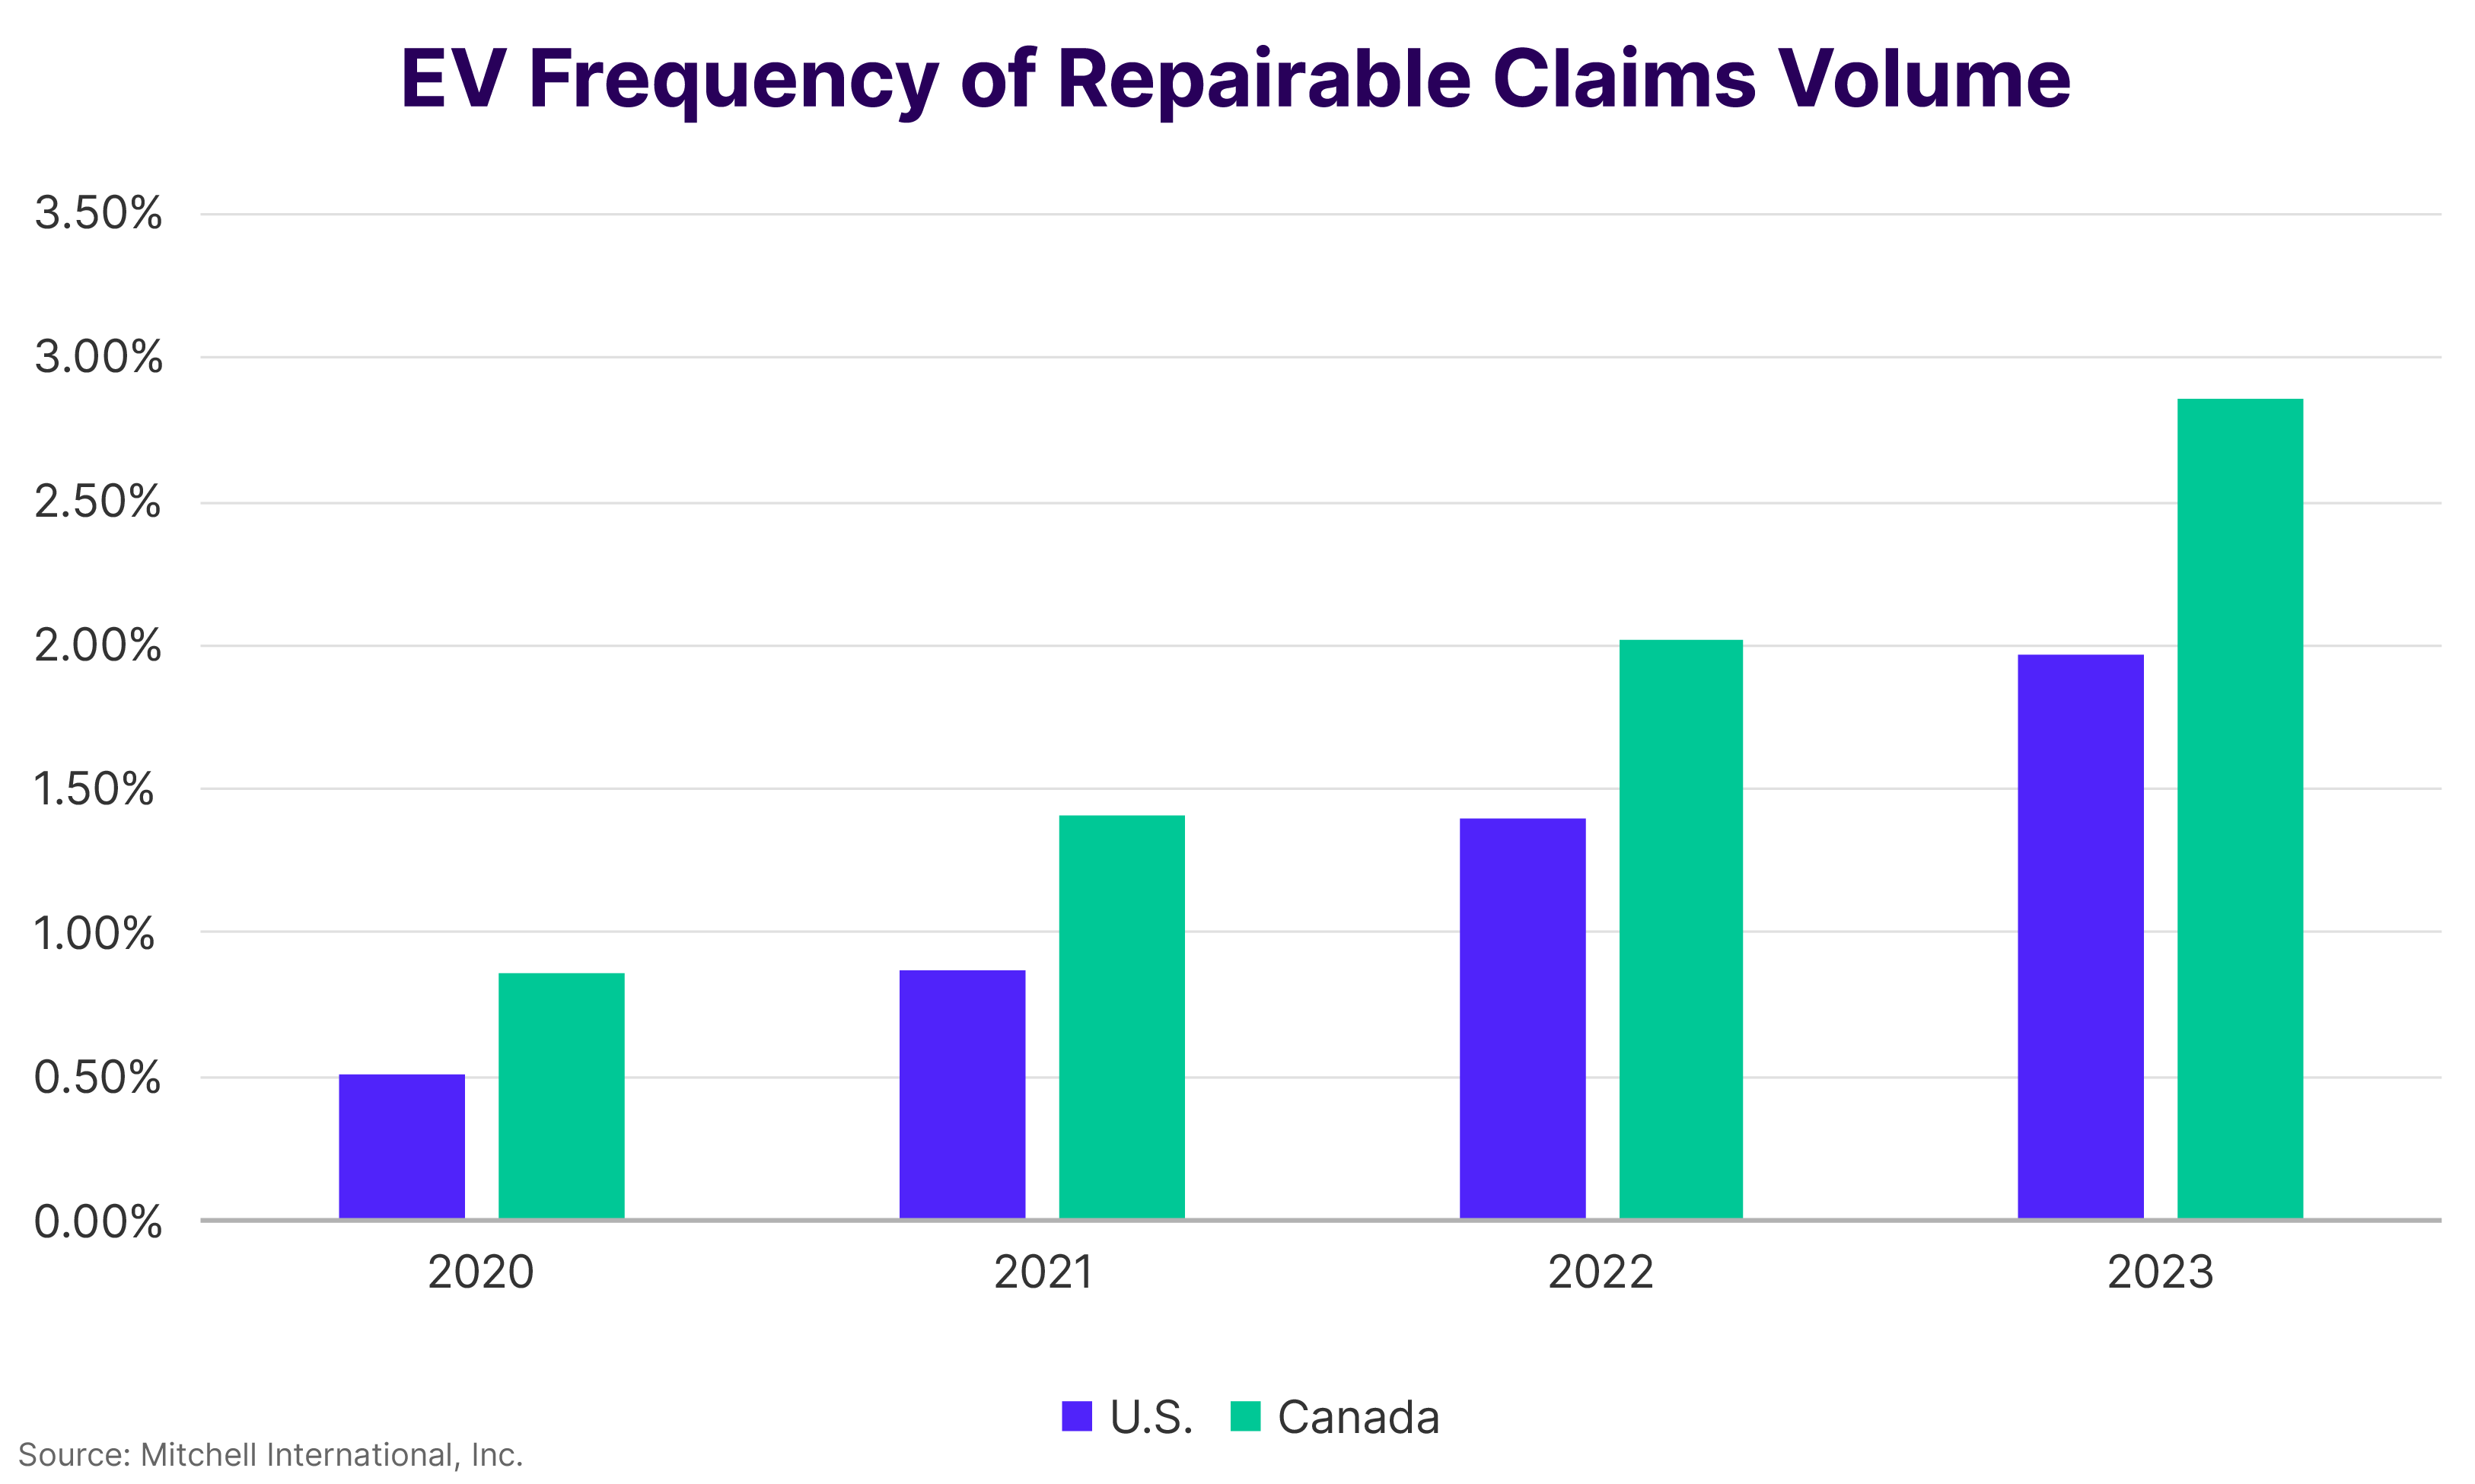 EV Frequency of Repairable Claims Volume 2023 Review